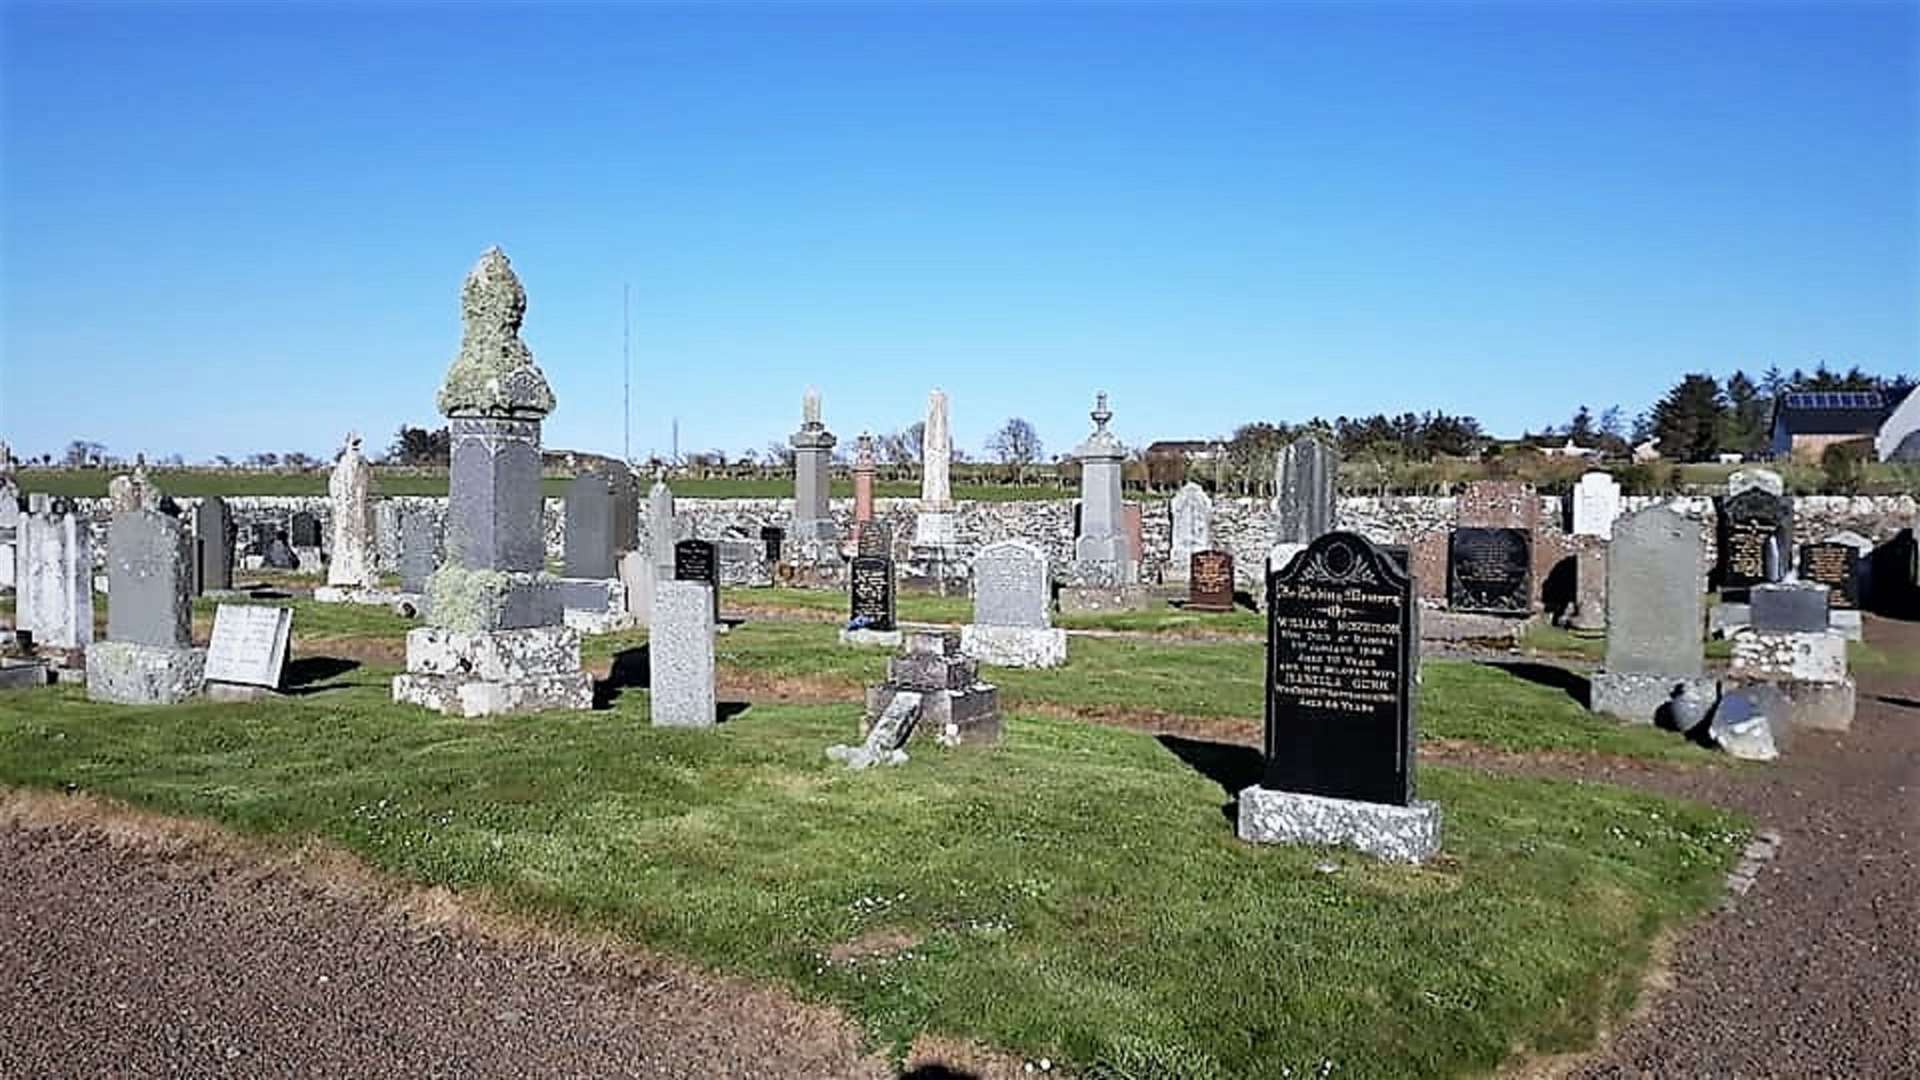 Thrumster cemetery was tended by councillor Raymond Bremner along with volunteers from the Thrumster Community Development Association - part of the Caithness Community Resilience programme.